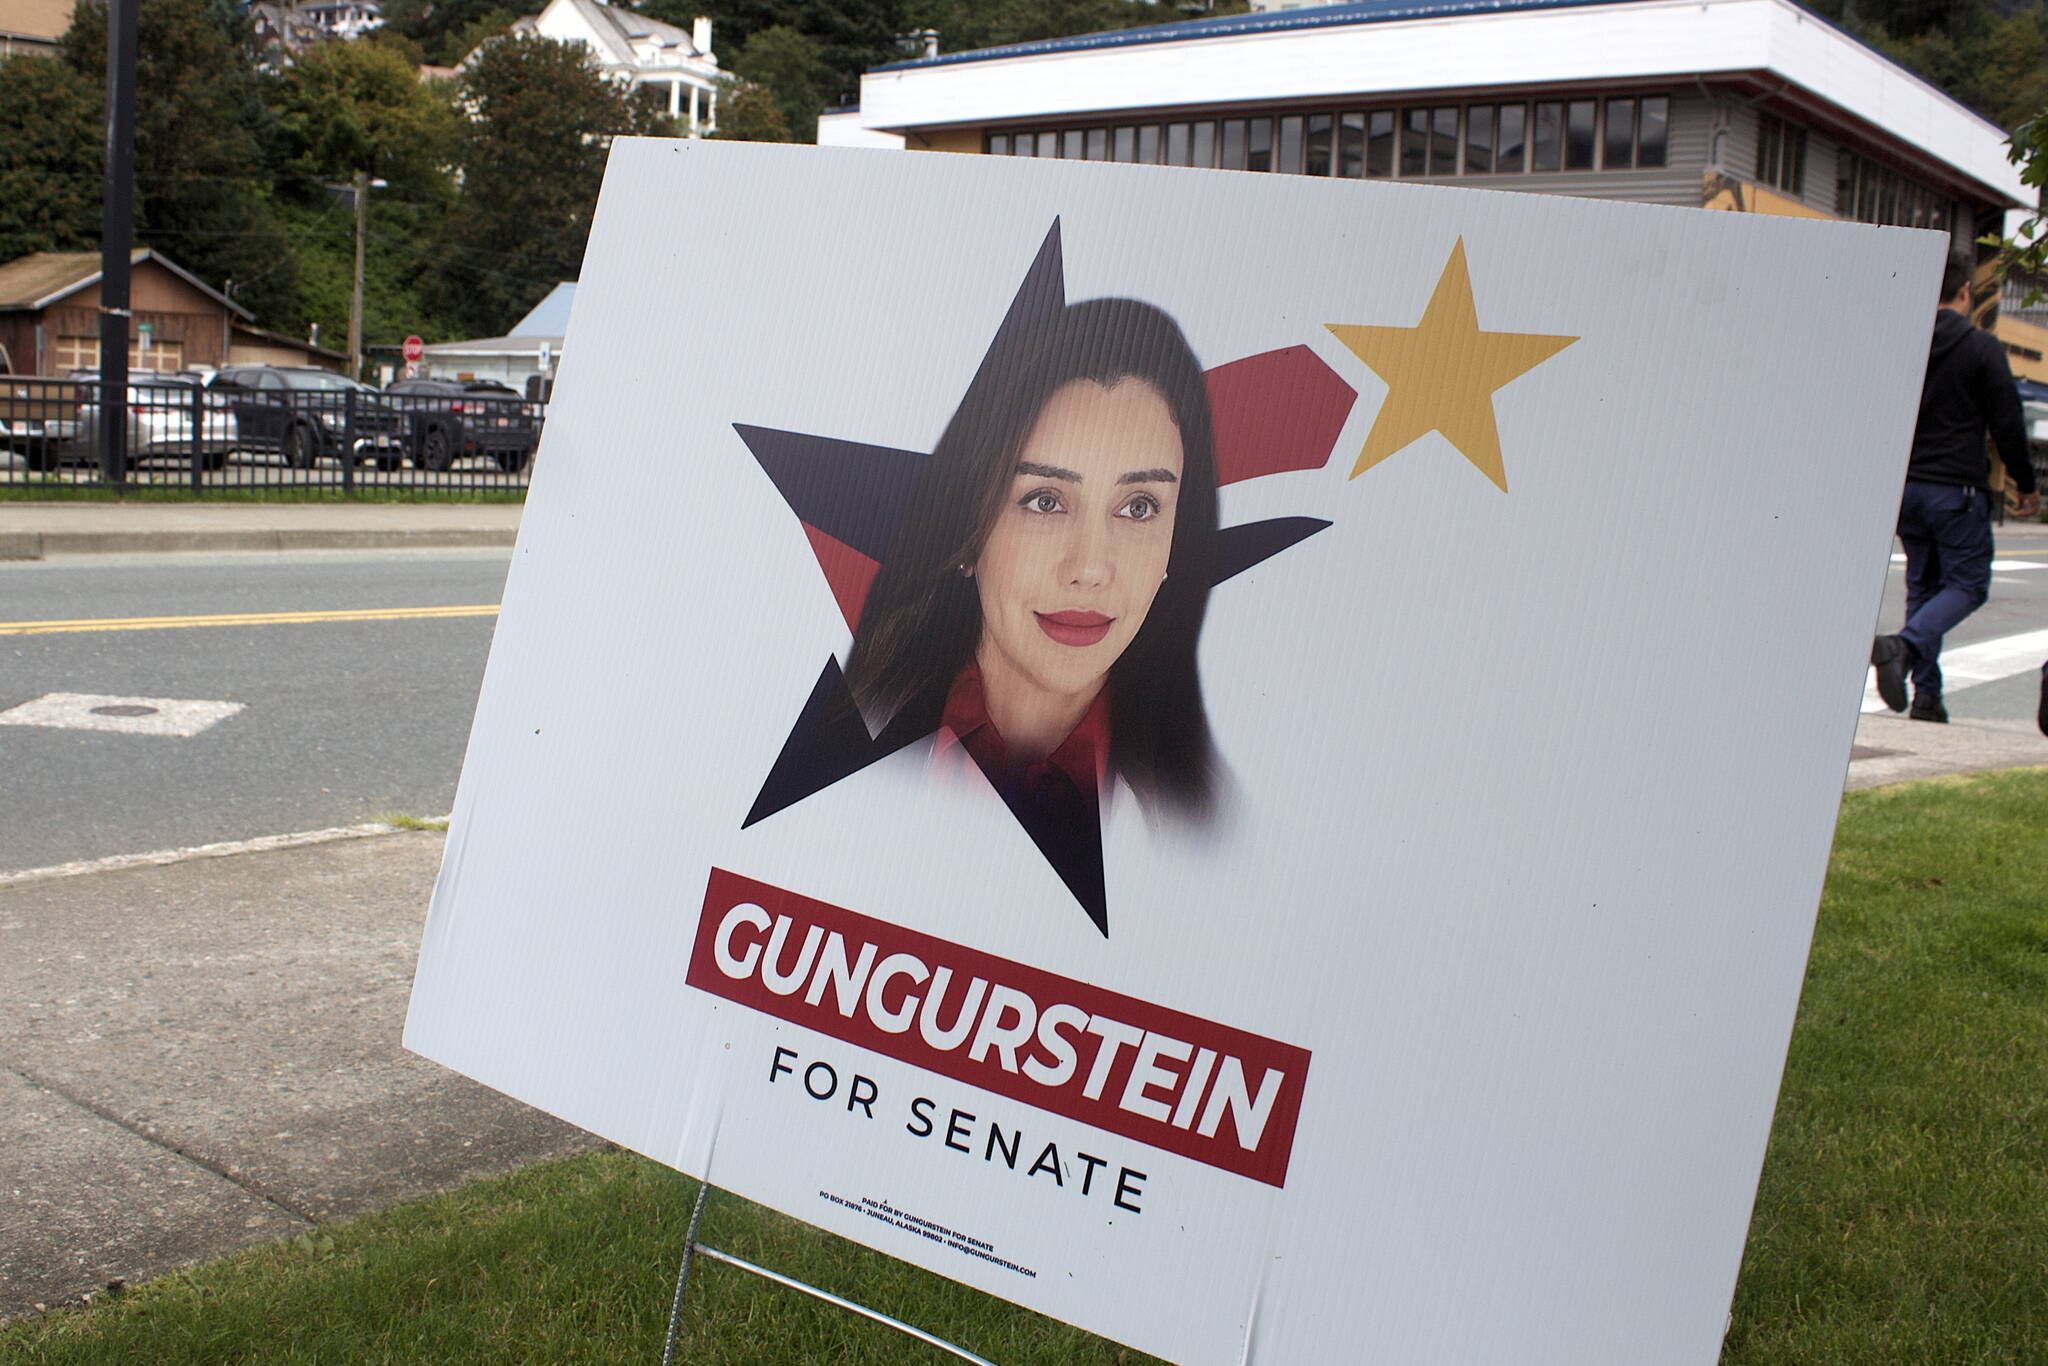 U.S. Senate candidate Shoshana Gungurstein stars in a campaign sign within view of the Alaska governor’s mansion. Gungurstein, an independent, got exposure this week for being a Hollywood actress under a different last name after questions about her past went unanswered throughout the campaign. She is one of 19 candidates seeking to be among the four selected in next Tuesday’s primary to compete in the November general election. (Mark Sabbatini / Juneau Empire)